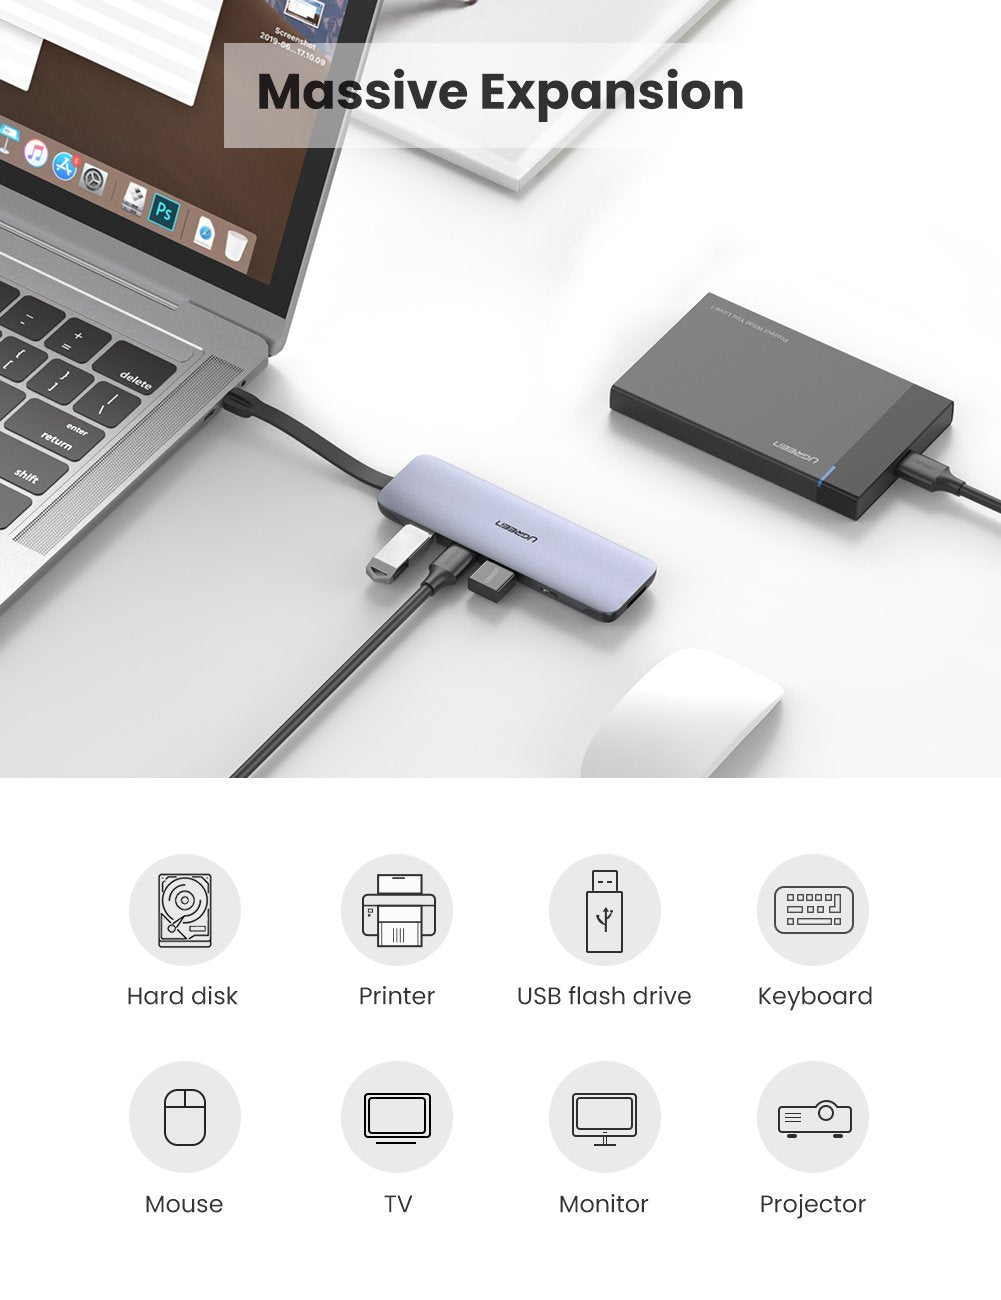 UGREEN CM285 USB-C 5 in 1 Multifunction Adapter available with up to 3 ports including USB 3.0 / USB-C / HDMI